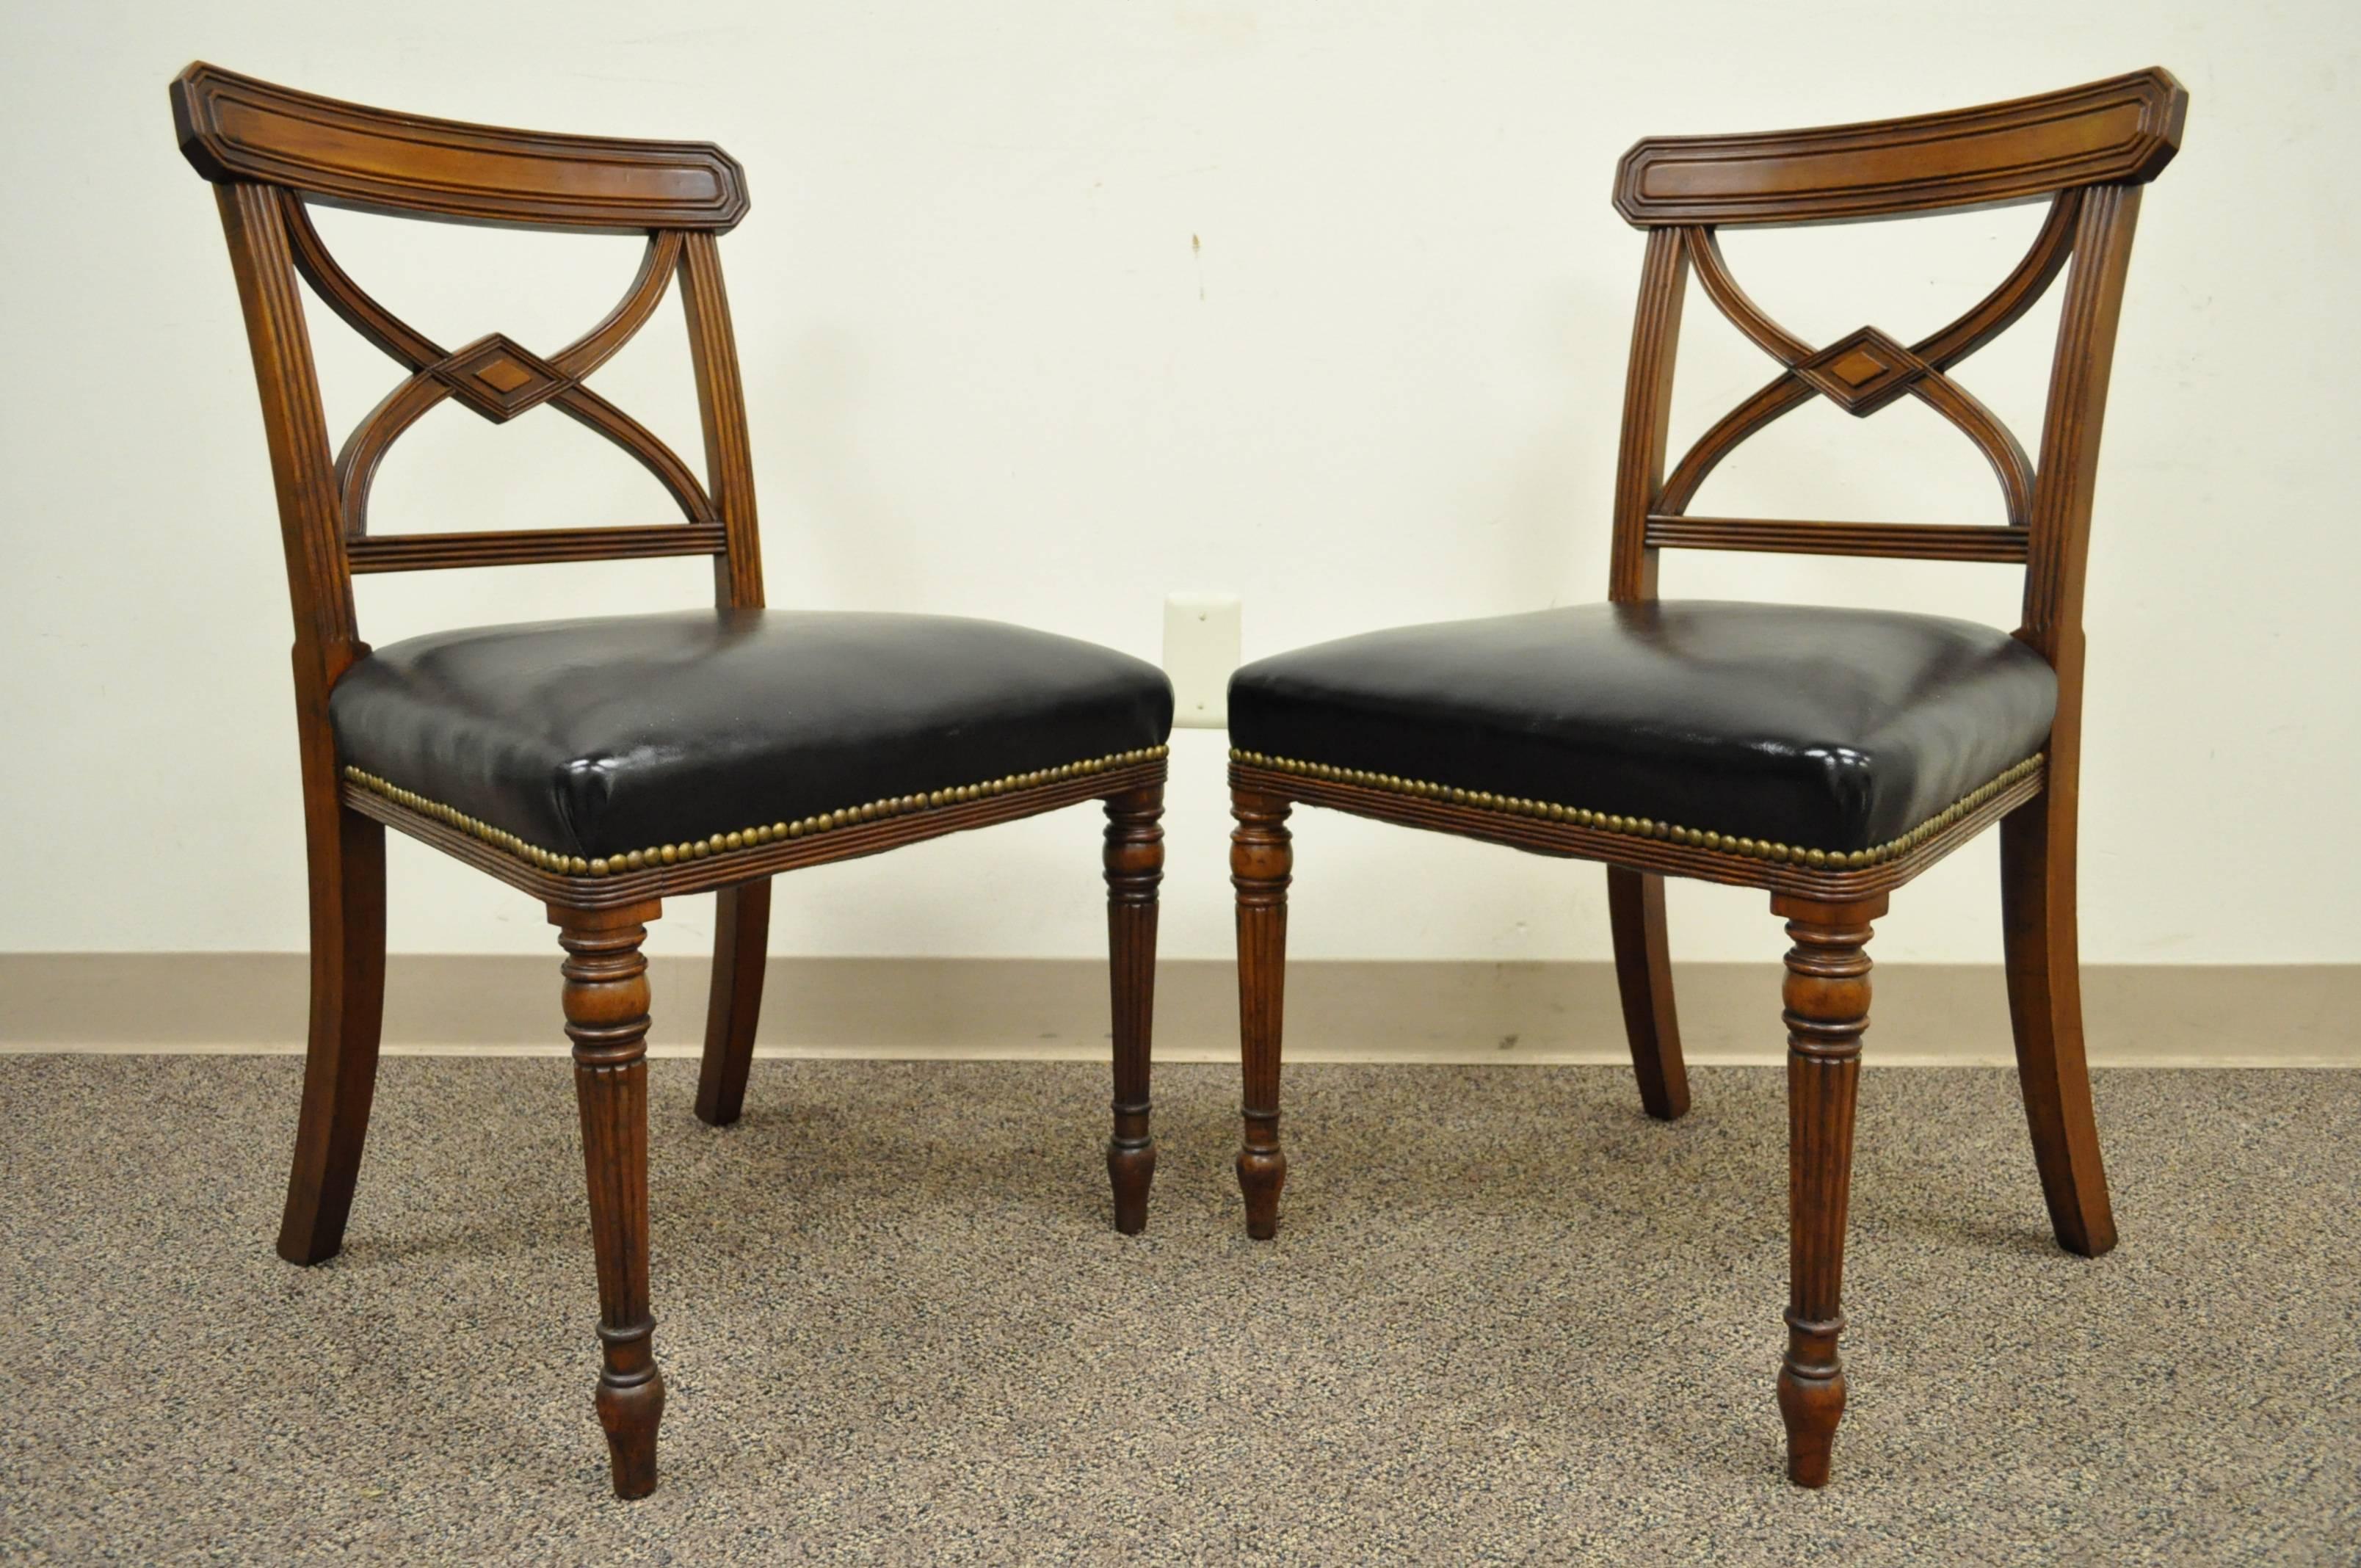 Attractive set of six English solid mahogany Regency side chairs with leather seats. It appears that three of the chairs are 19th century Regency chairs with the remaining three chairs being an early 20th century bench made custom to match. Great